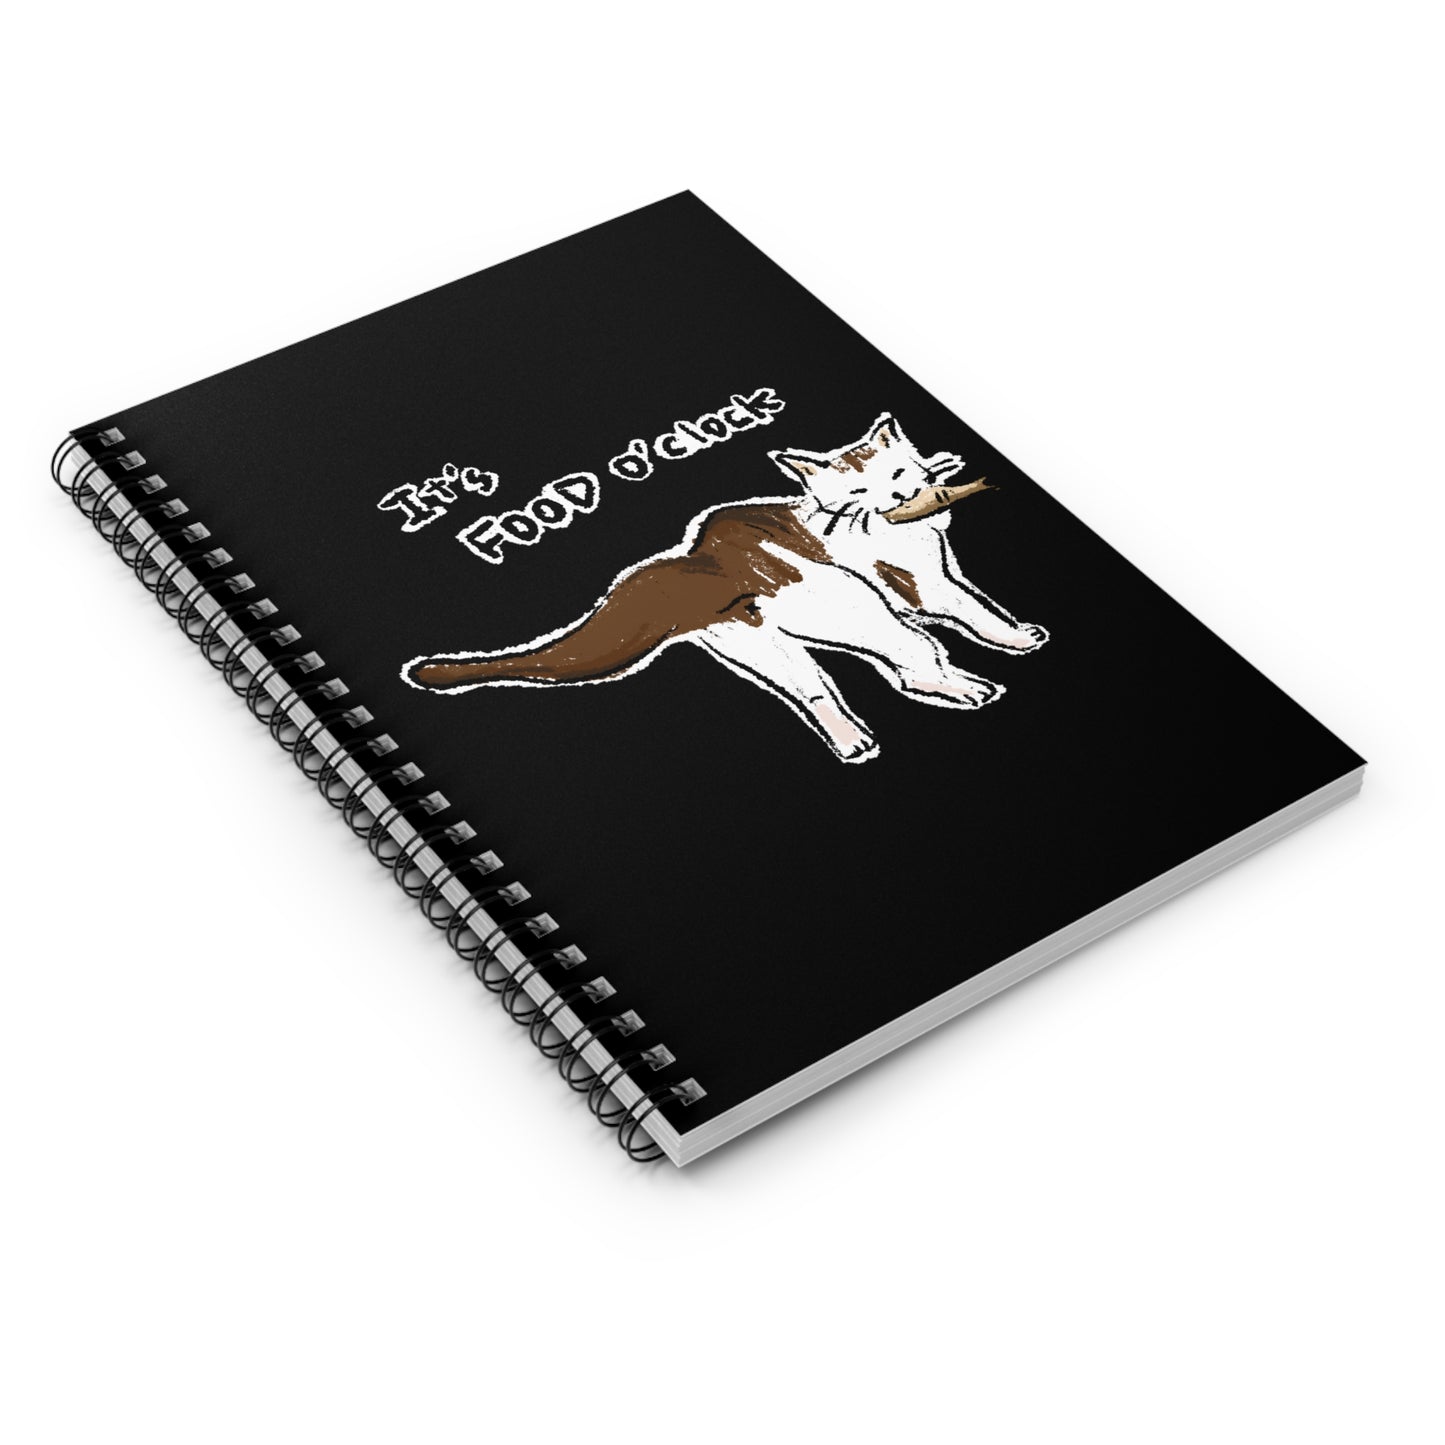 Funny Cat Meme It's food o' clock Spiral Notebook - Ruled Line